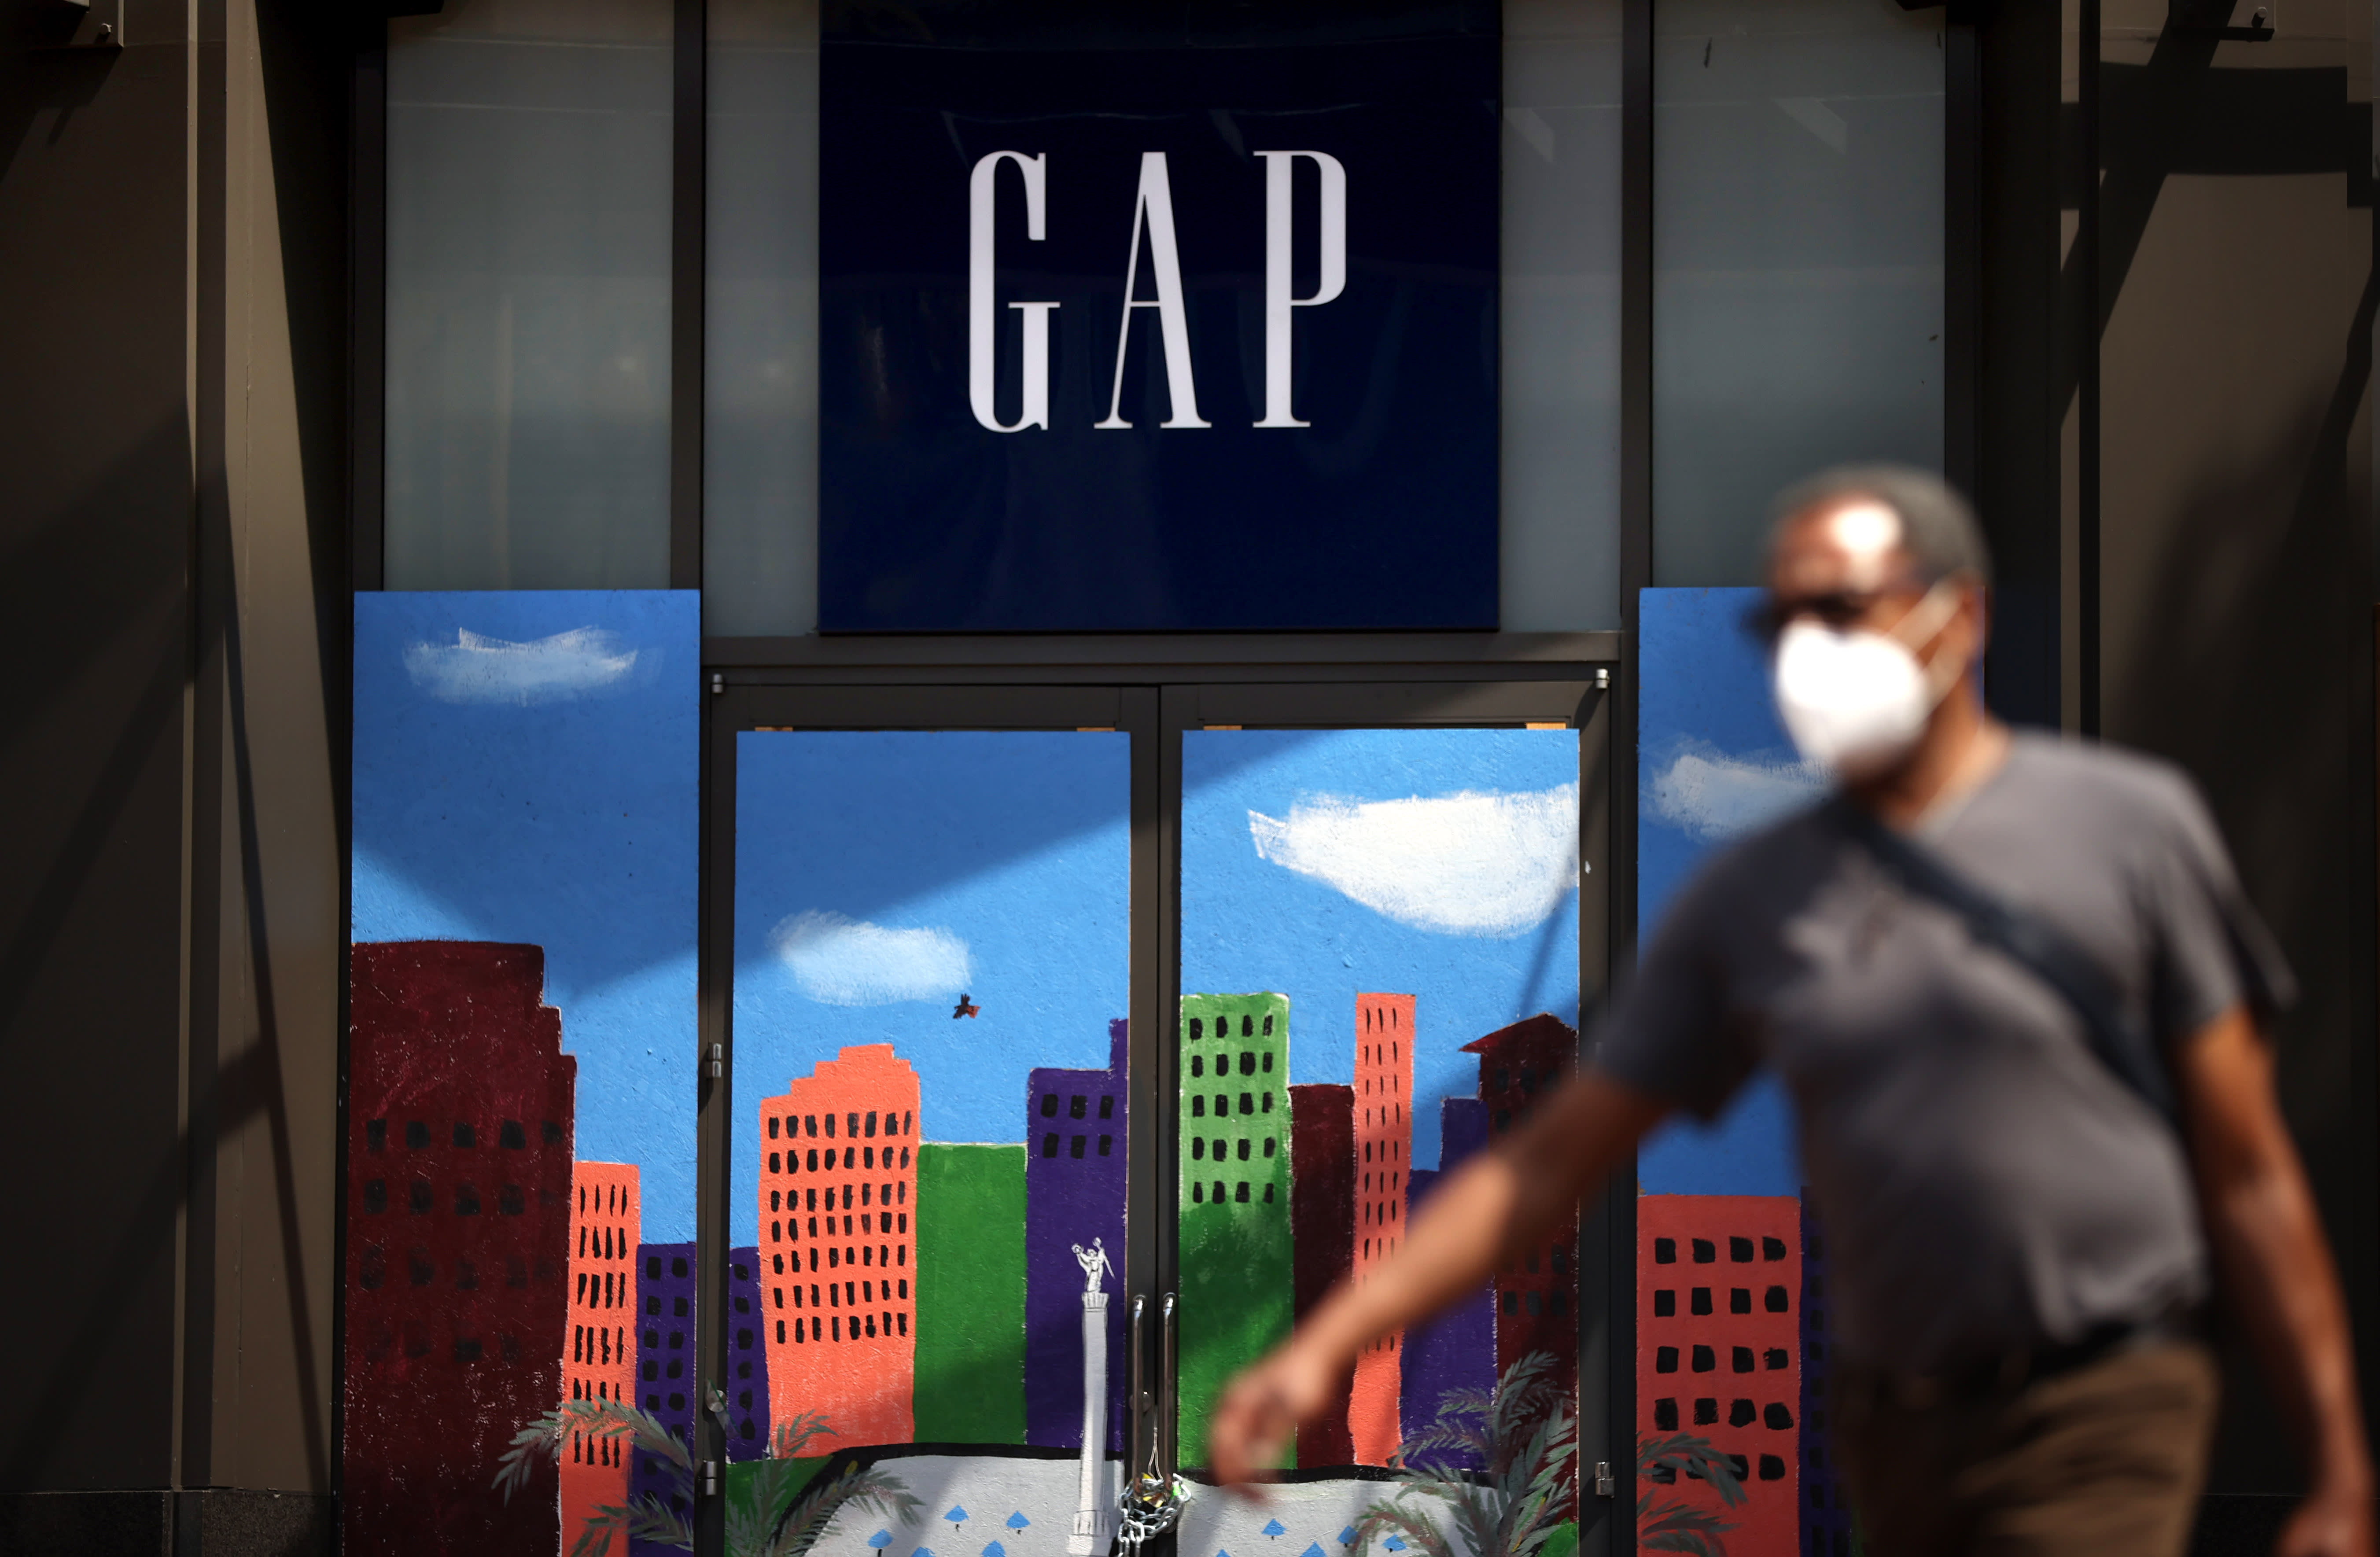 Gap shares crater 9% after retailer sees millions in lost sales from delayed product shipments, cuts forecast